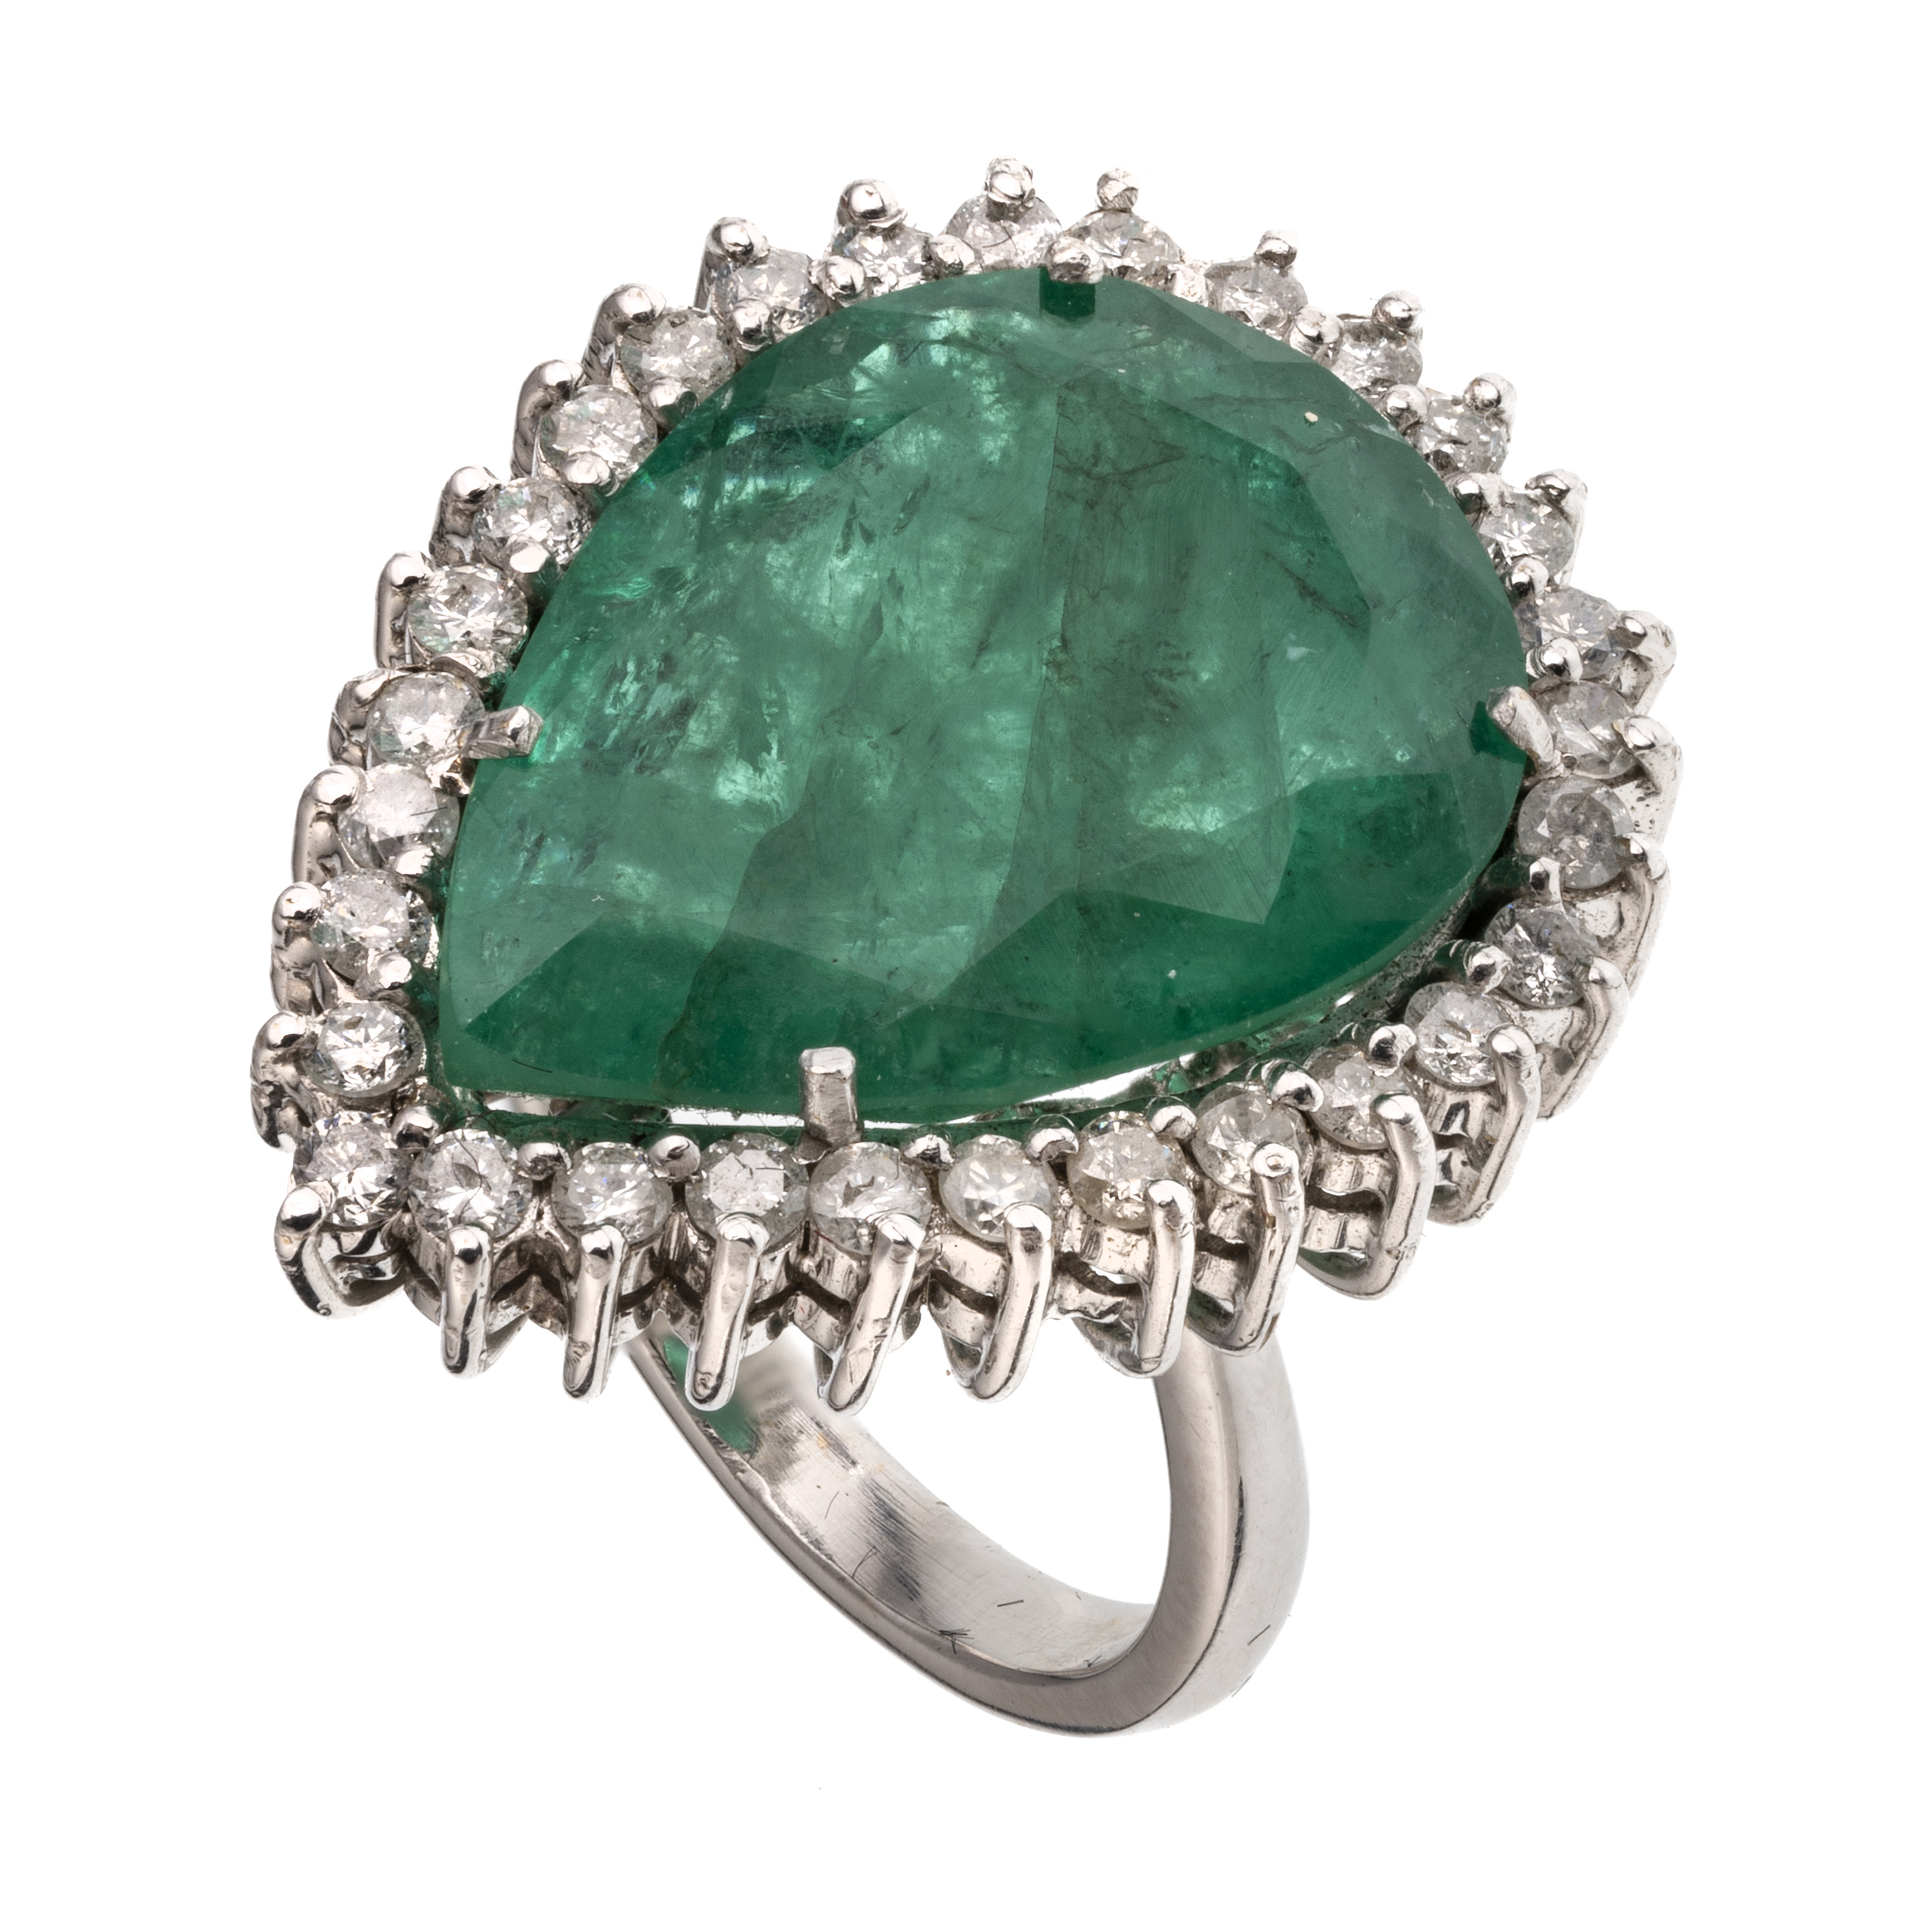 WHITE GOLD RING WITH CENTRAL EMERALD AND DIAMONDS